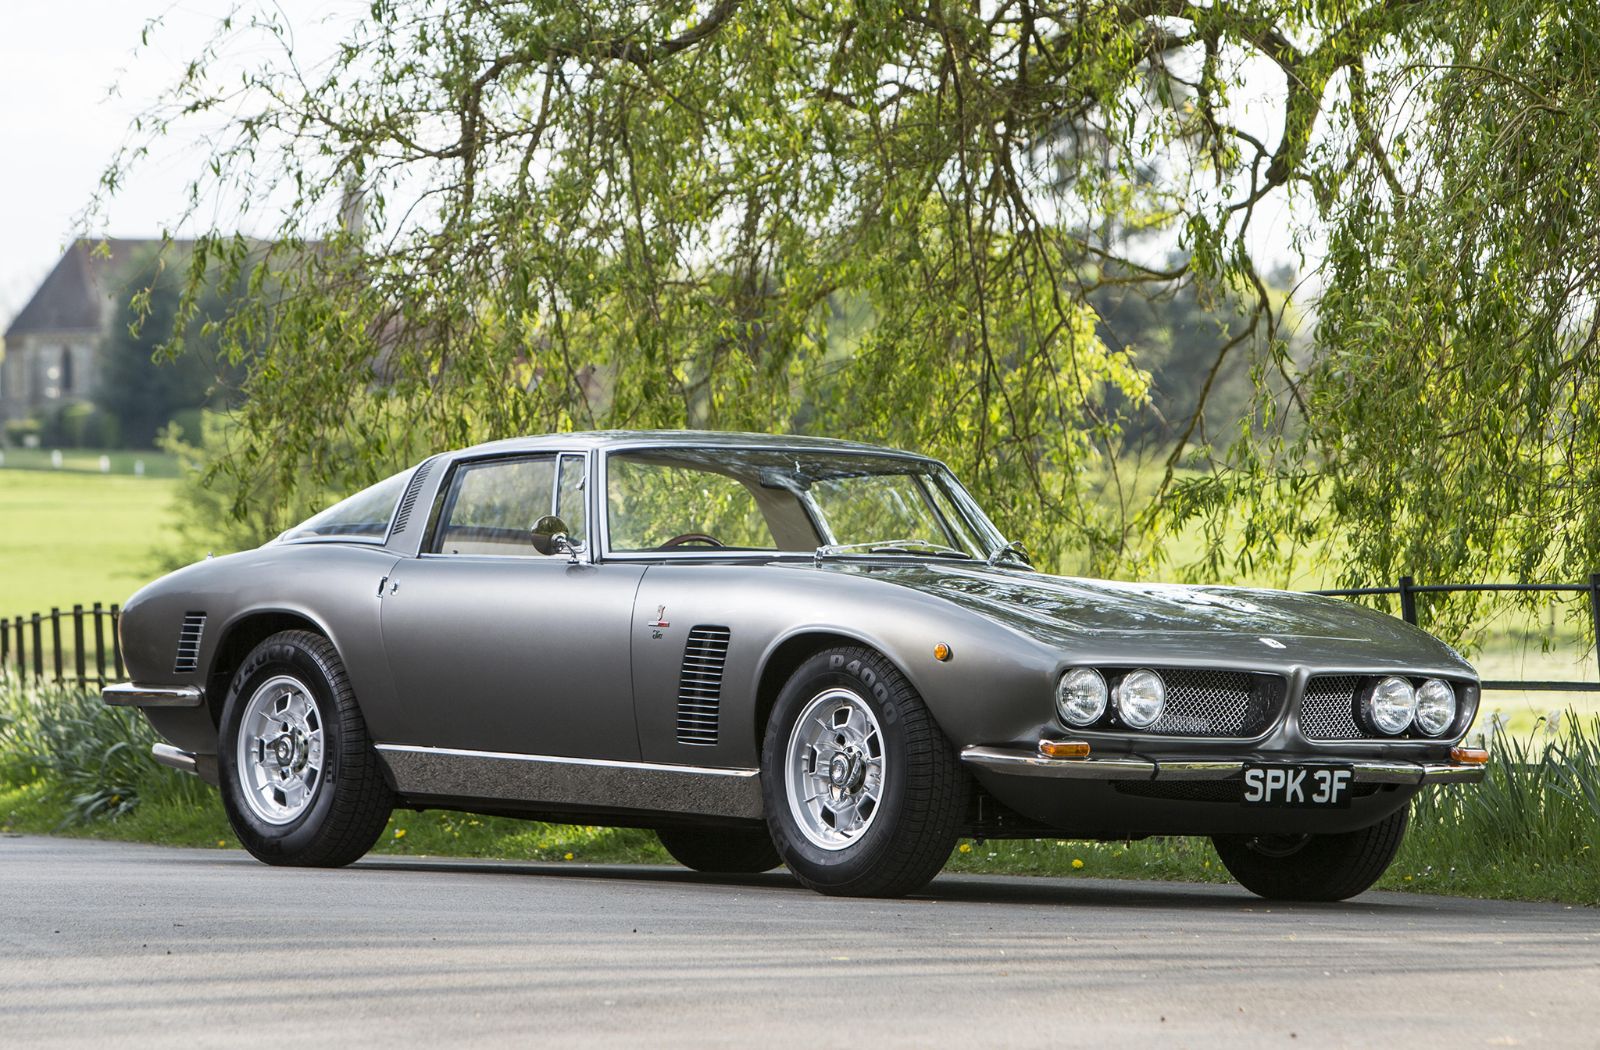 iso-grifo-the-exquisite-italian-grand-tourer-powered-by-american-muscle-165636_1.jpeg